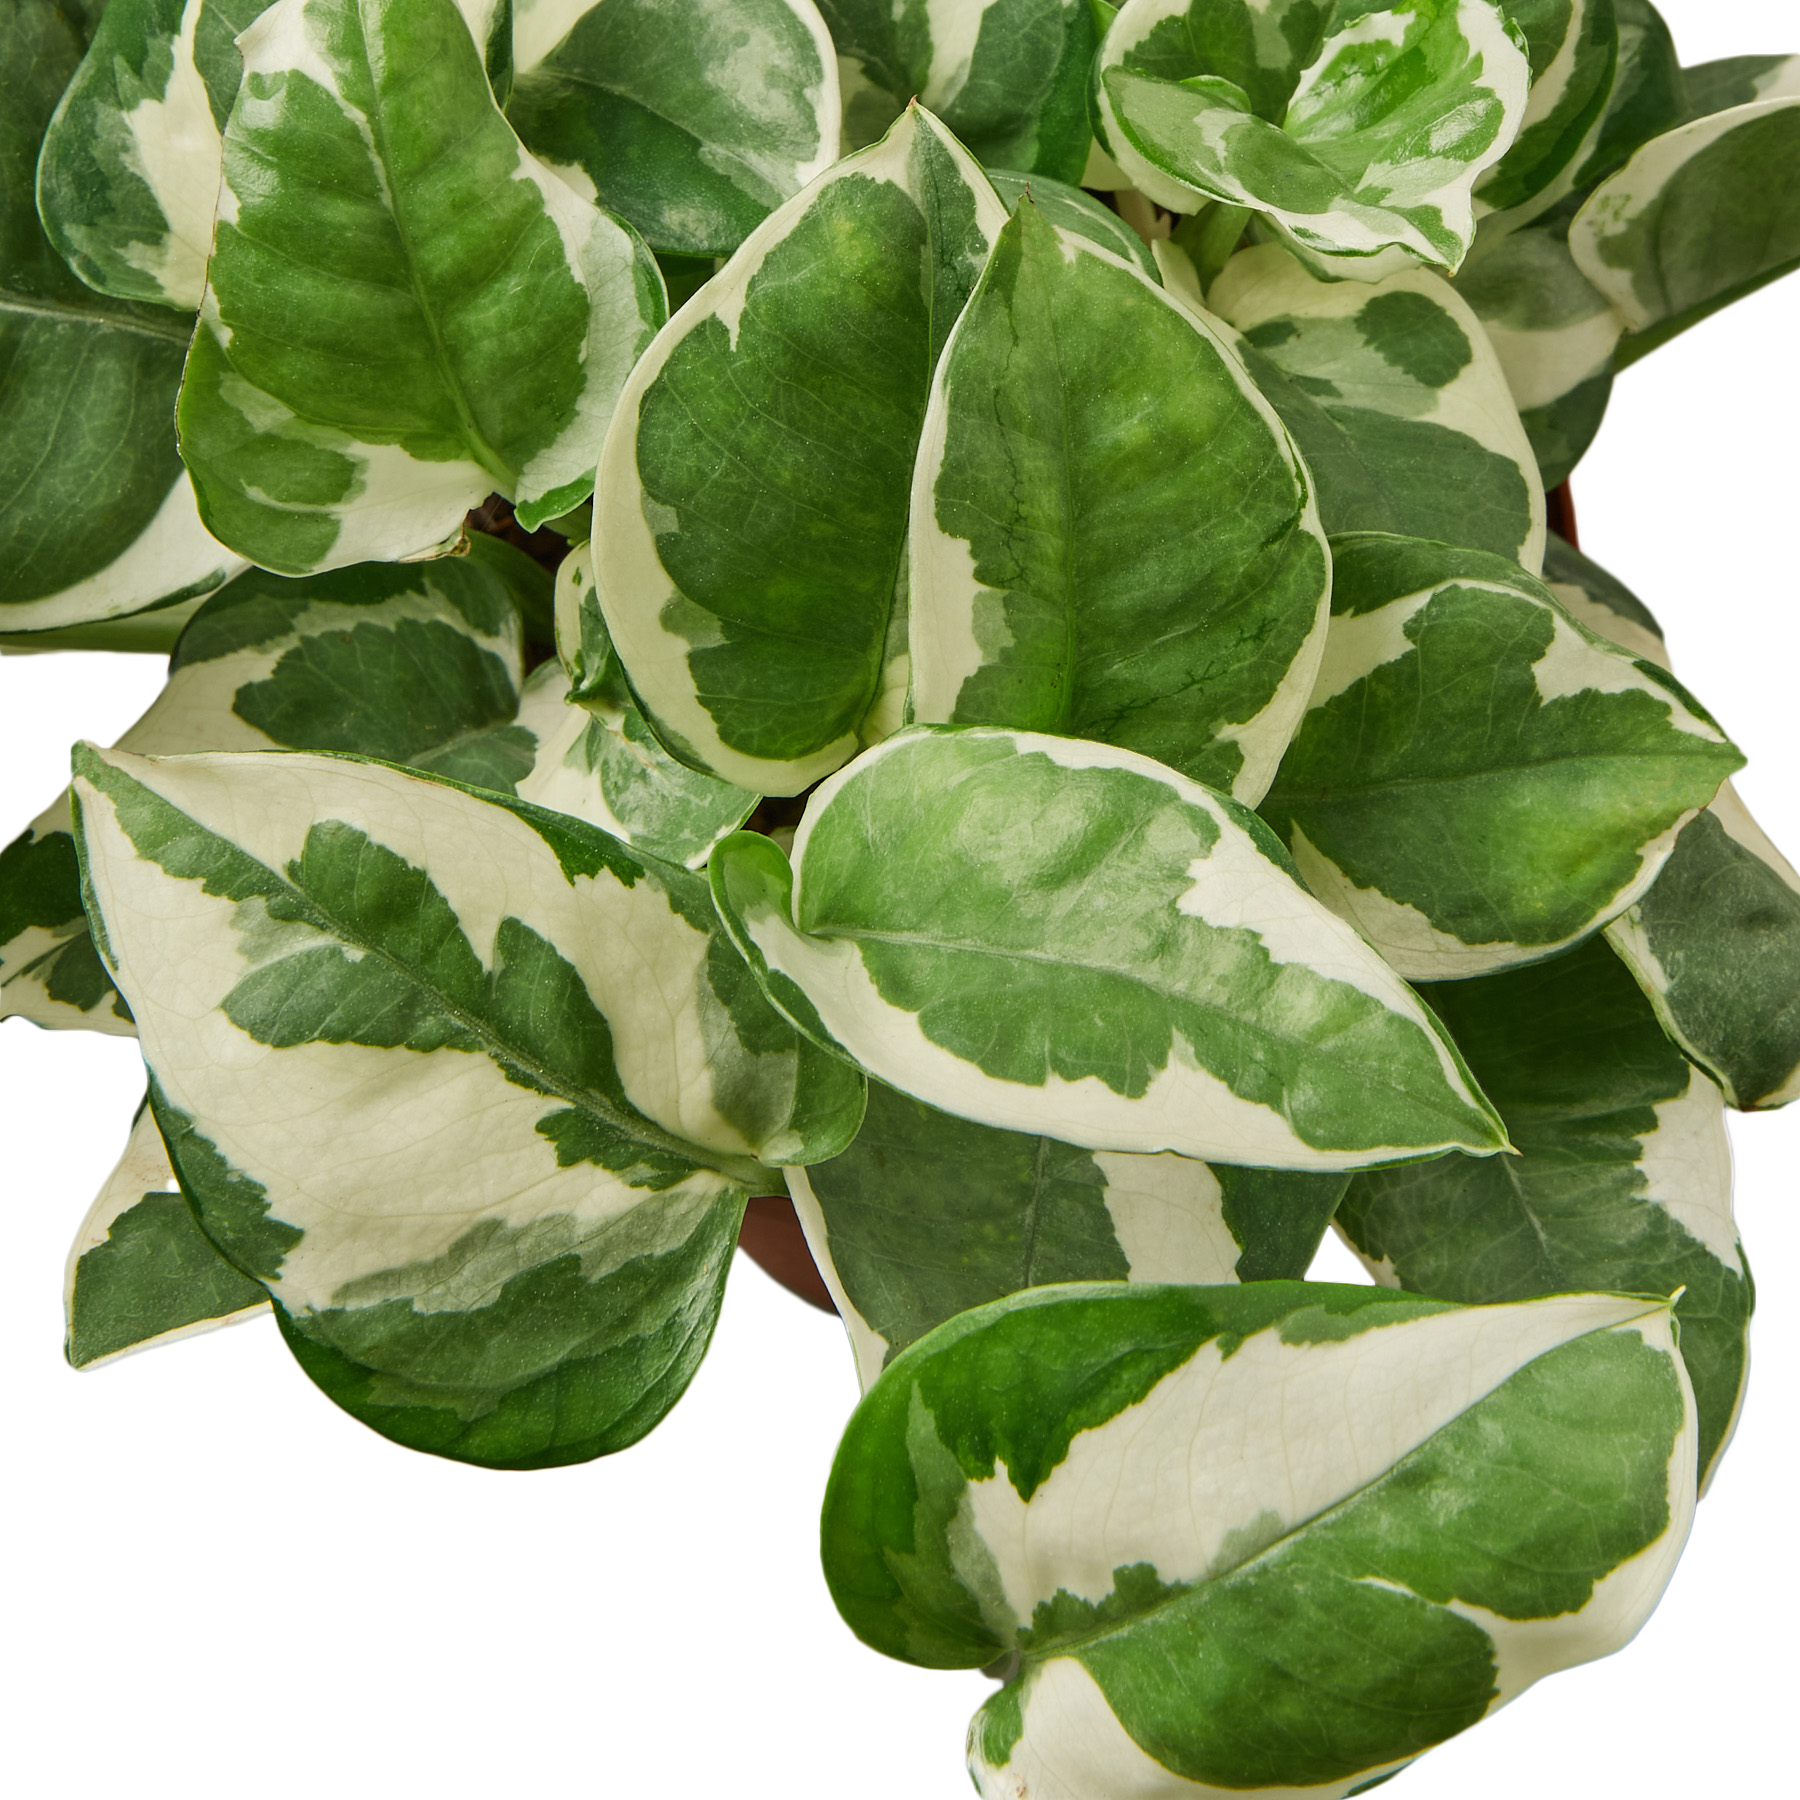 A plant with white and green leaves in a pot, available at the best garden nursery near me.